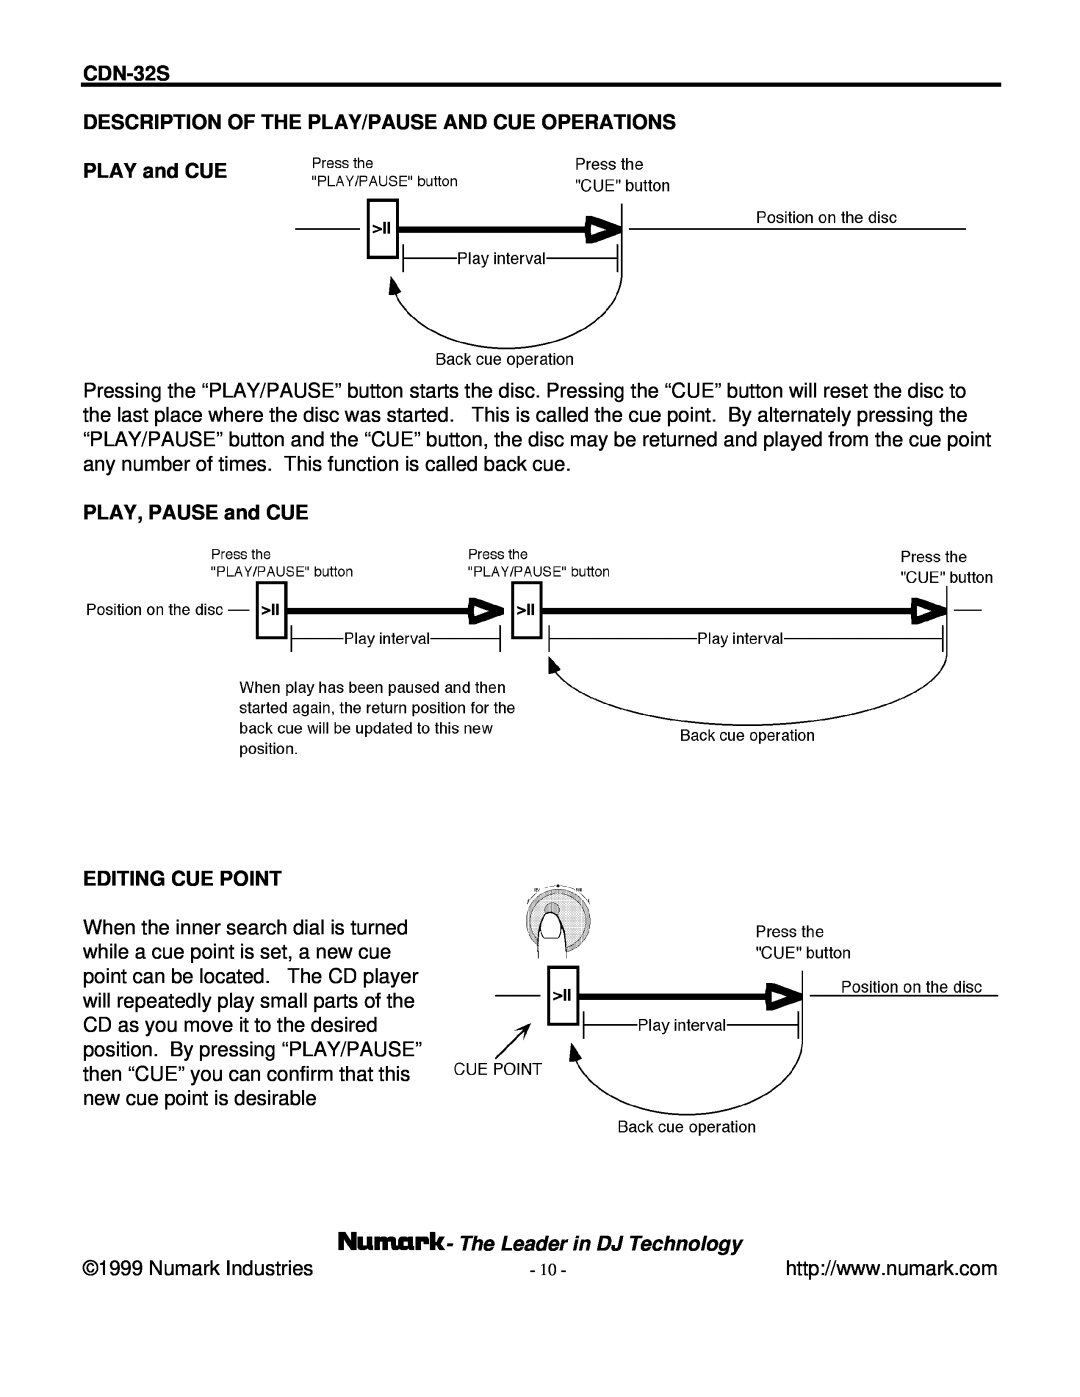 Numark Industries CDN-32S Description Of The Play/Pause And Cue Operations, PLAY and CUE, The Leader in DJ Technology 